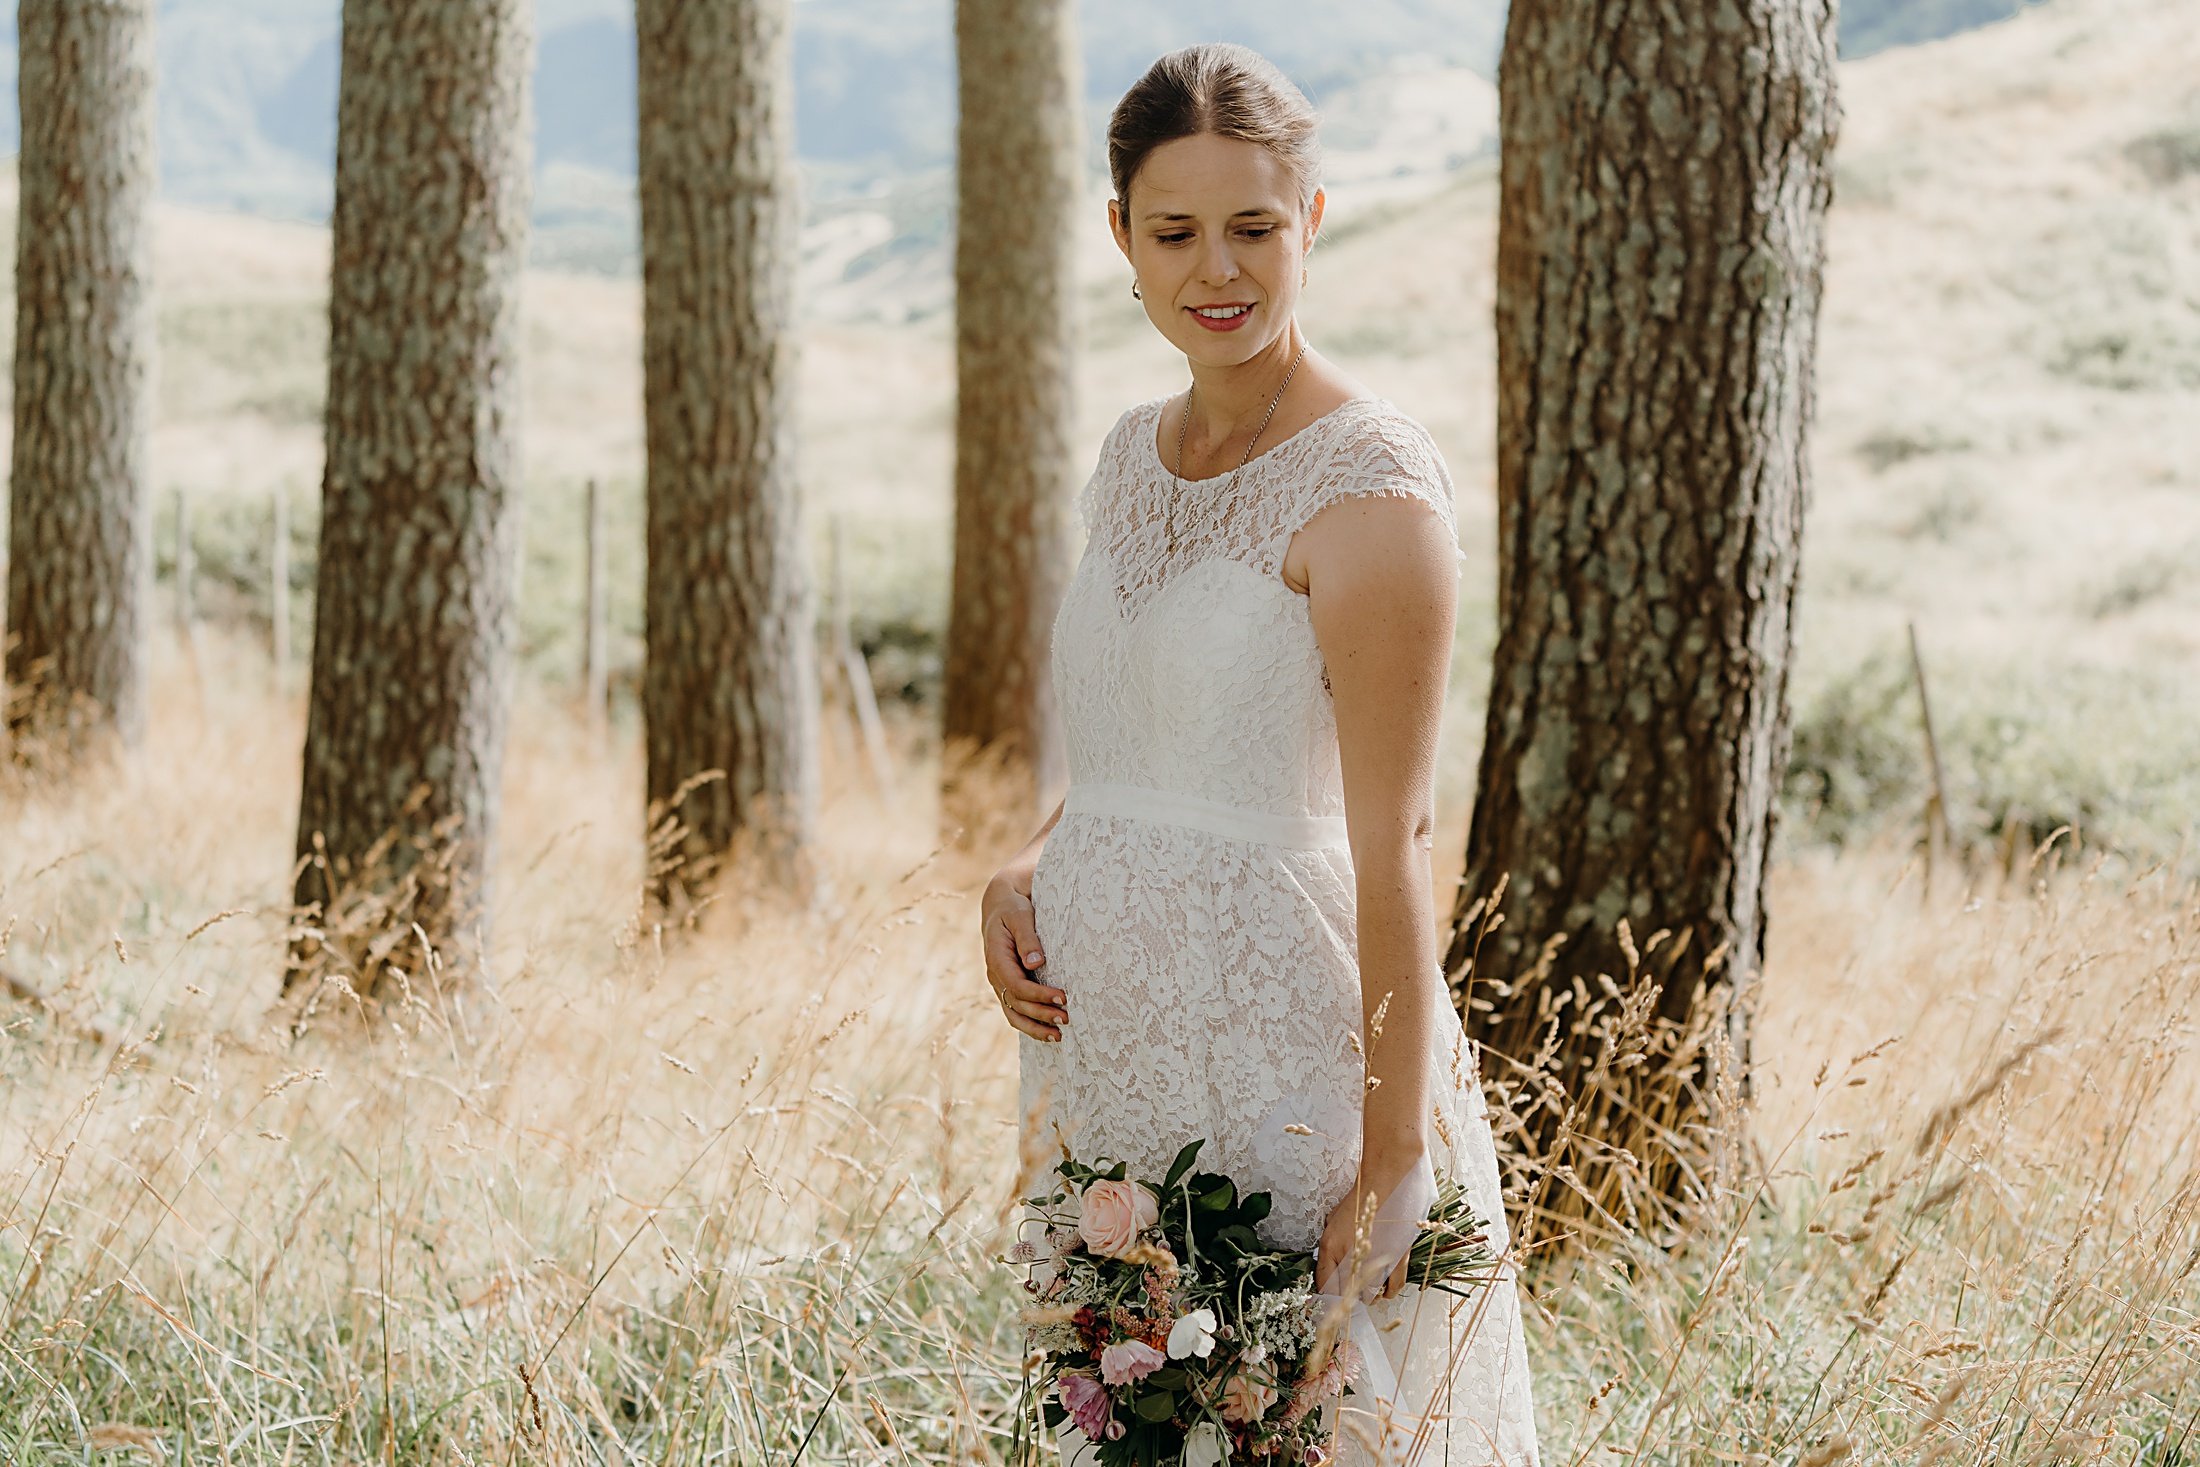 Daisy by Katie Yeung Wedding Dress and pregnant bride